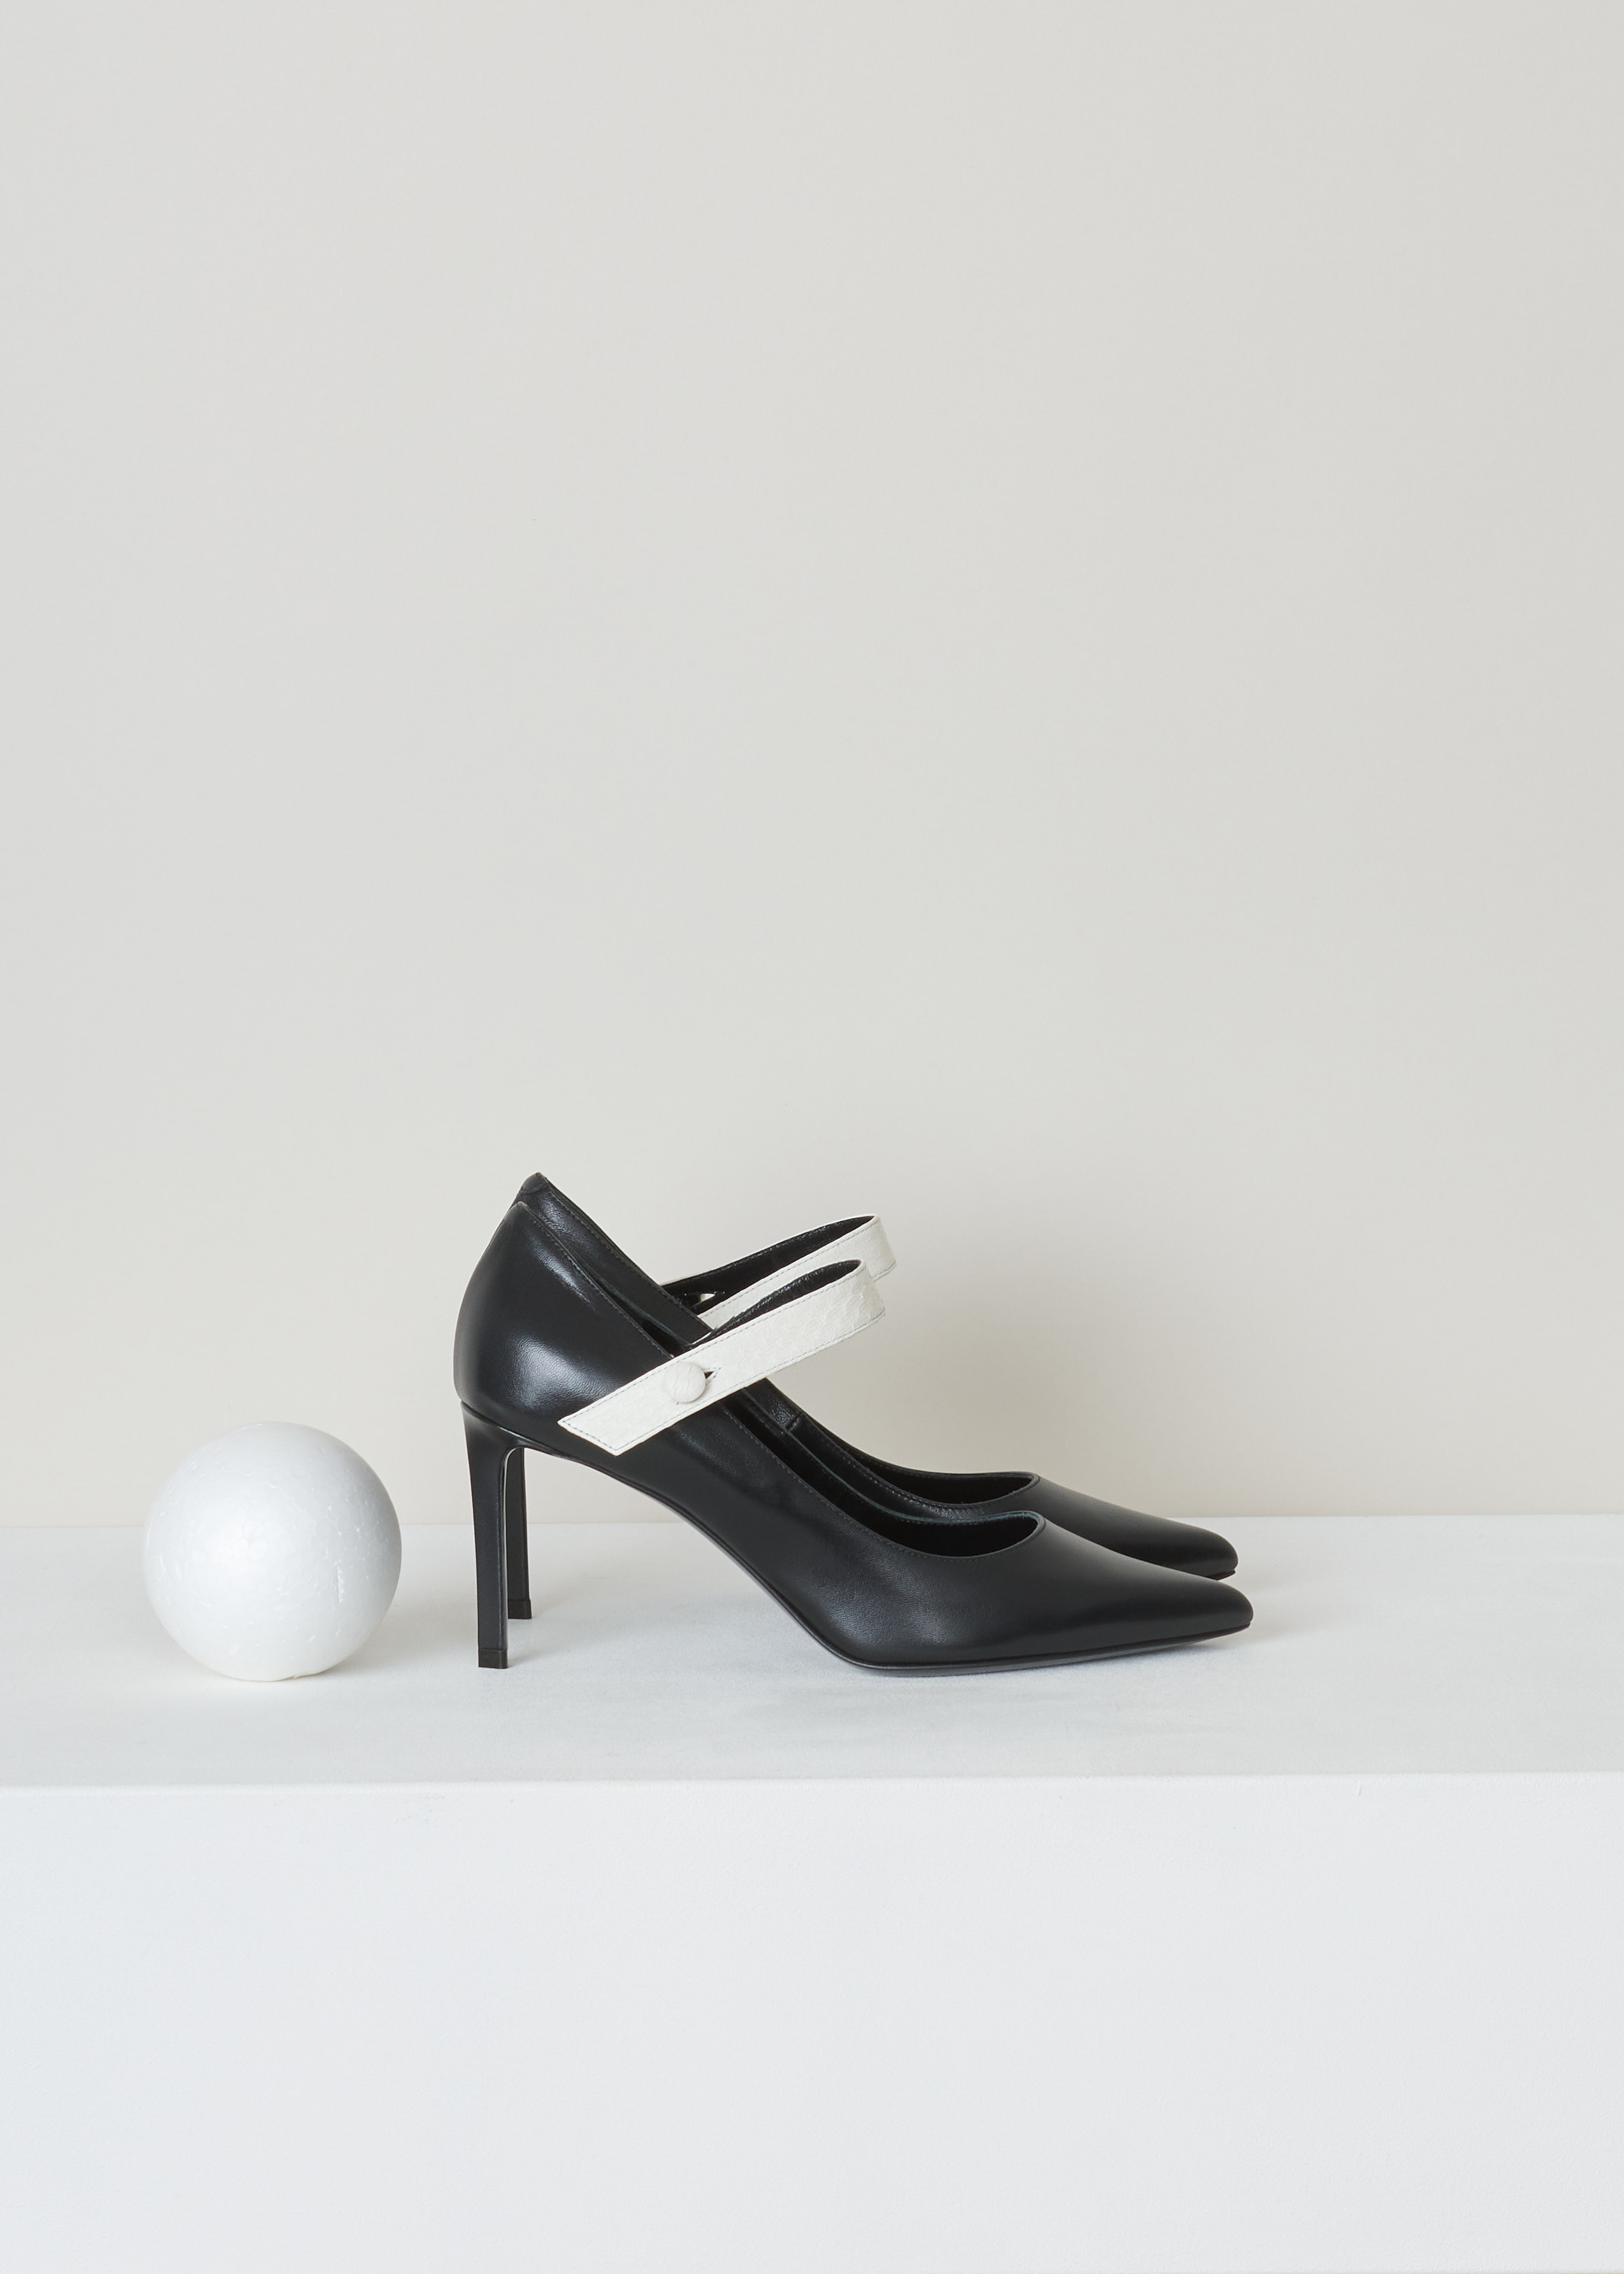 Celine, Mary jane sharp kidskin & elaphe, 330234005C_38AW_BlackWhite, black white, side, Crafted in style and highlighted with a pretty Mary Jane design, this pair of pumps exudes a glamorous shine. Made from the finest black leather, these closed-toe pumps come with regular heels, a off-white strap with button closure.